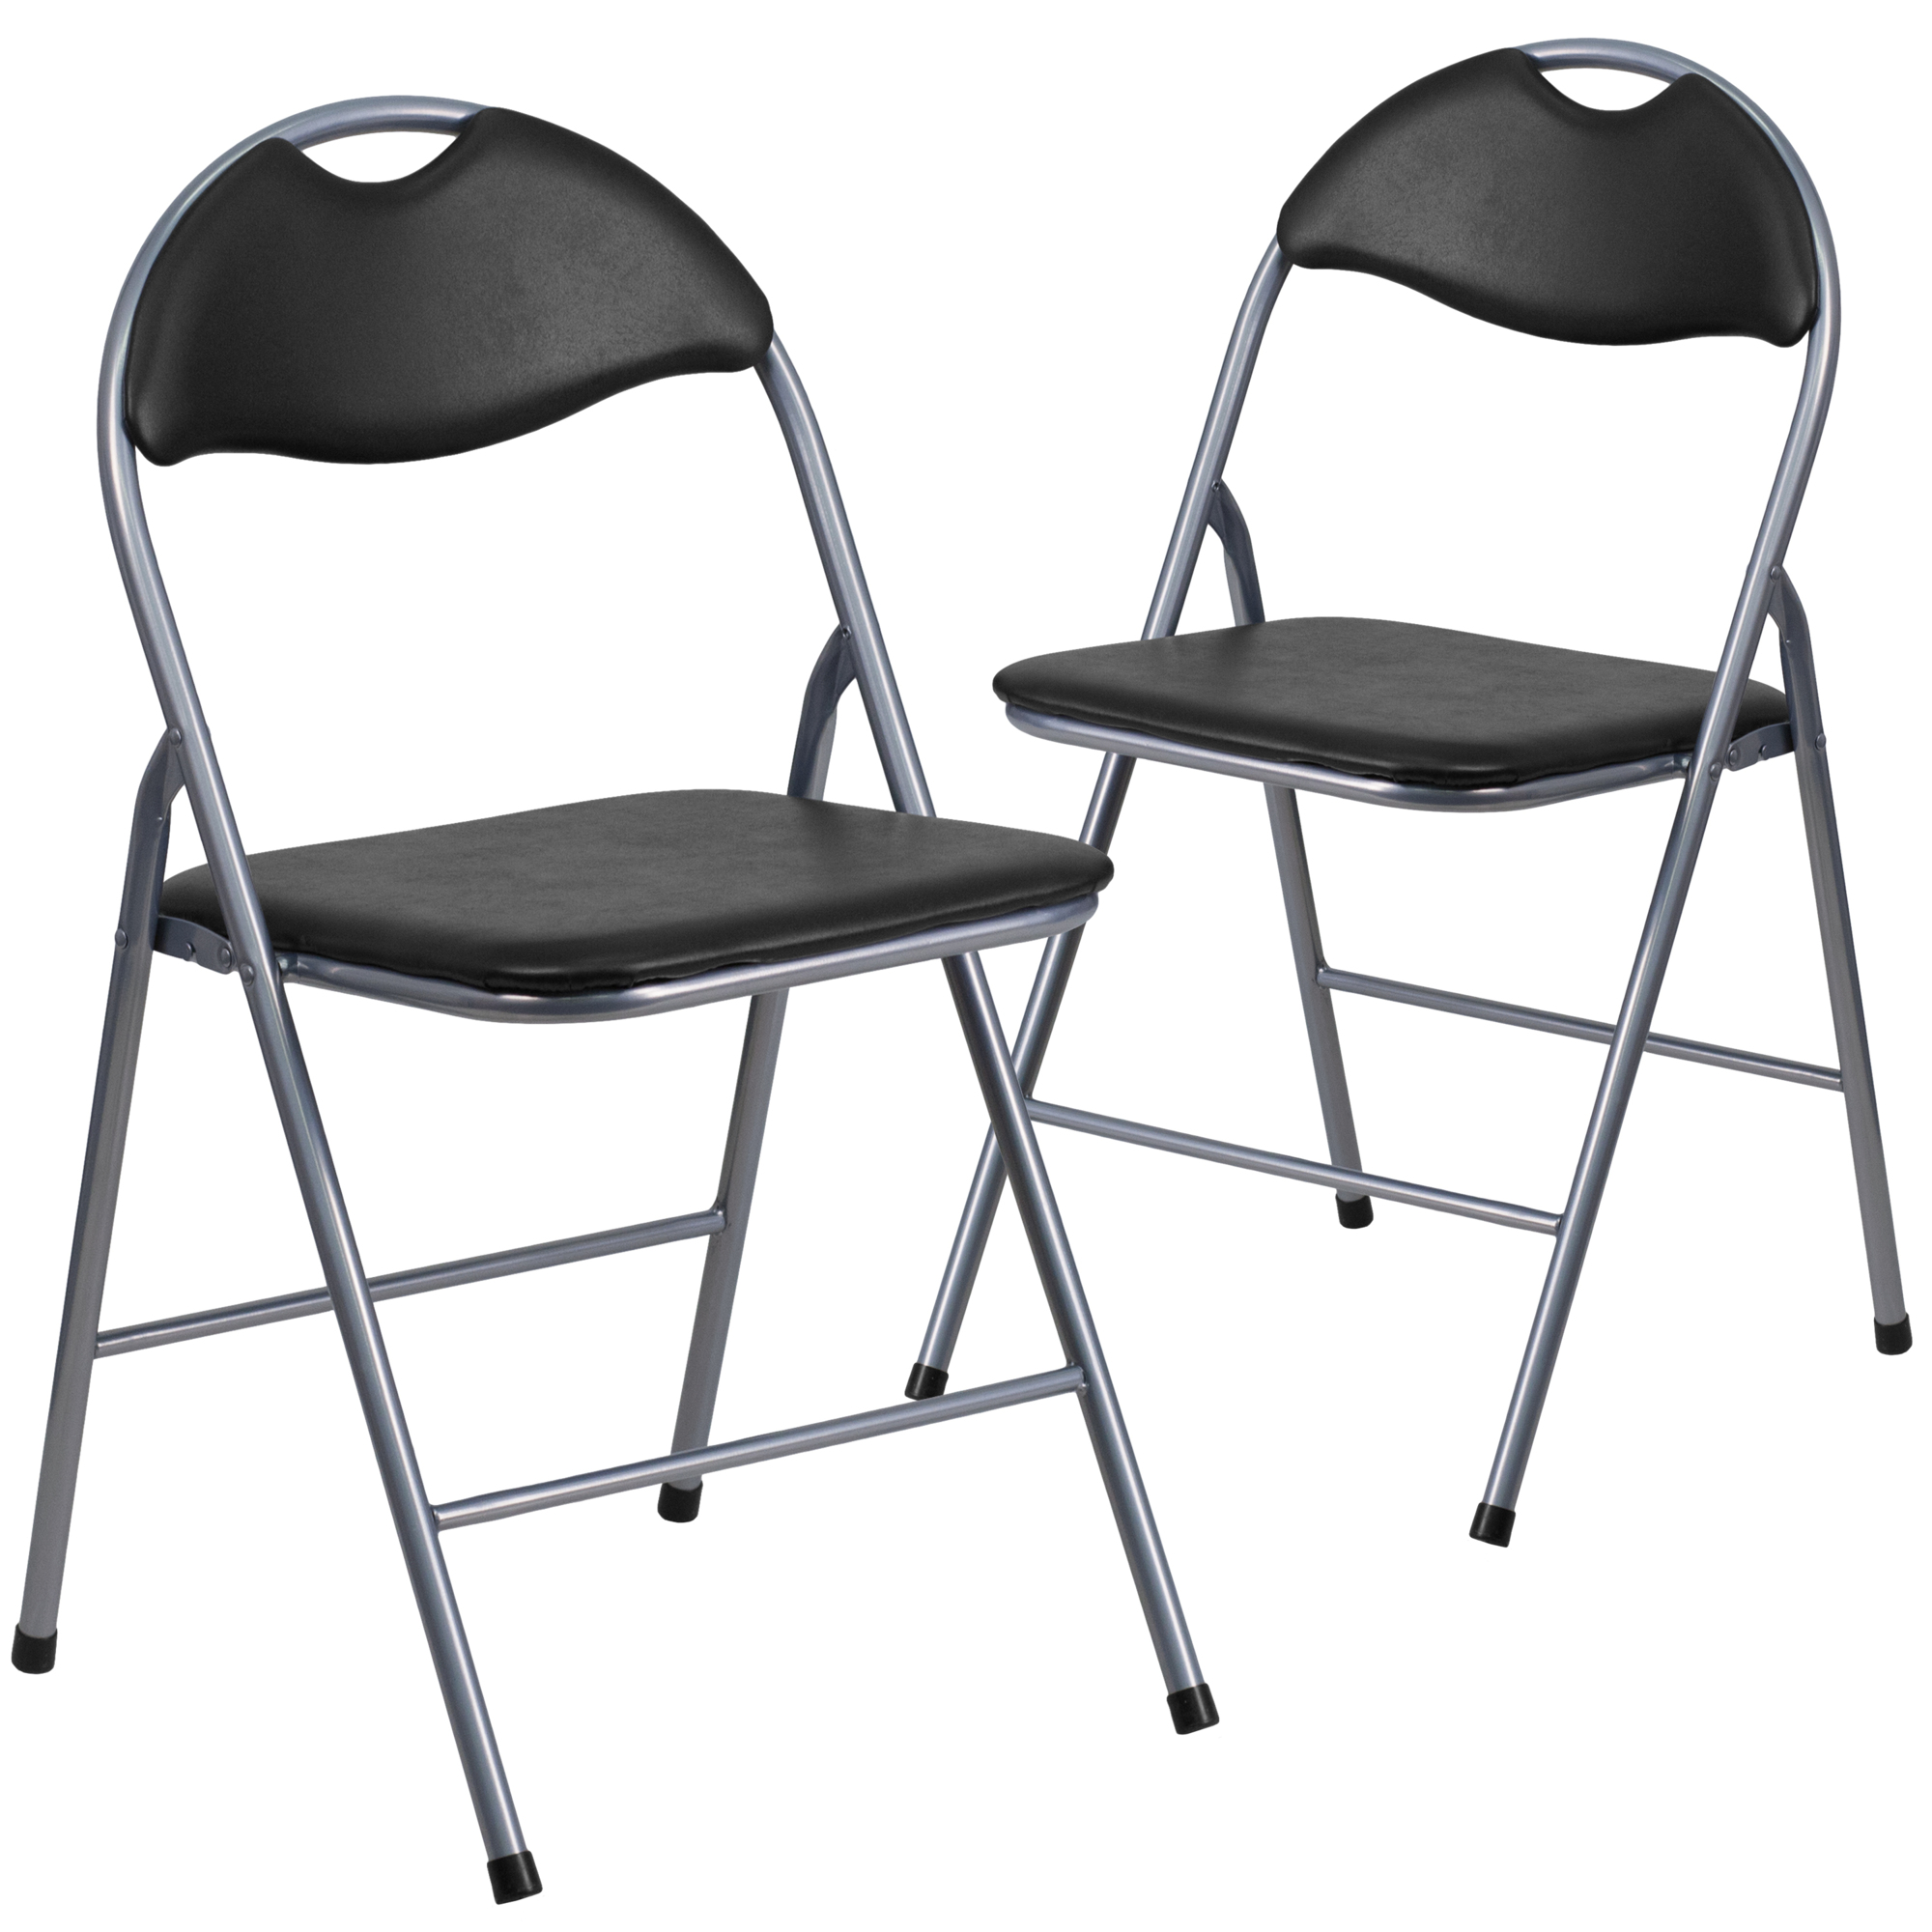 Flash Furniture, Black Vinyl Metal Folding Chair w/ Carrying Handle, Primary Color Black, Included (qty.) 2, Model 2YBYJ806H